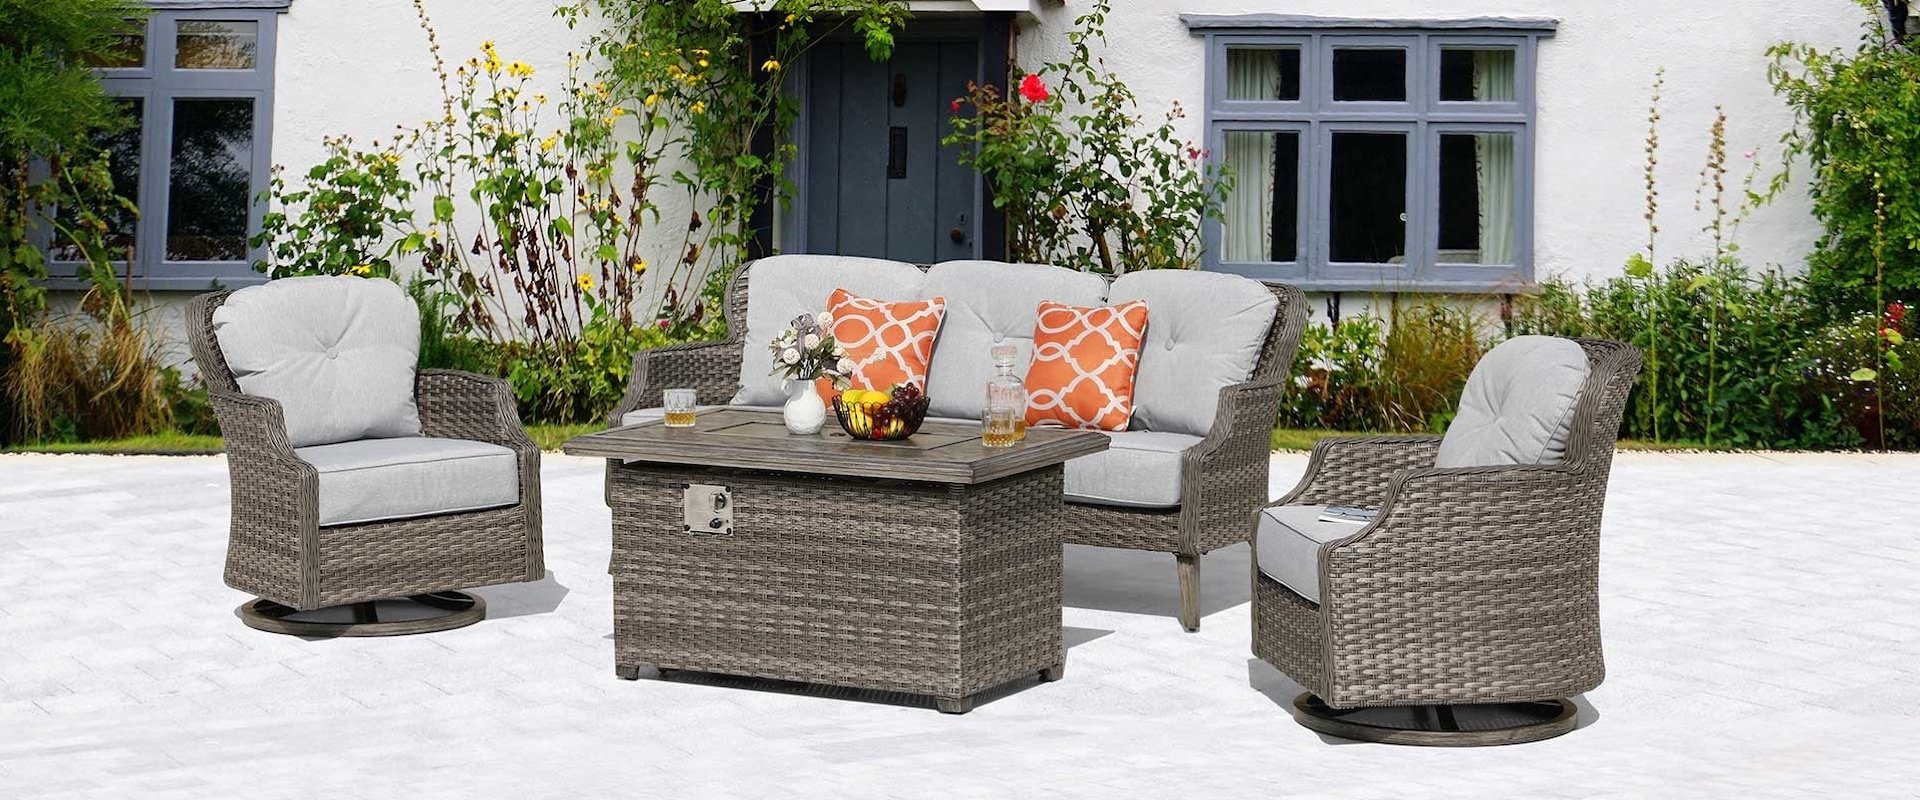 4-Piece Wicker Sofa Set with Swivel Rocking Chairs and Fire Pit Table